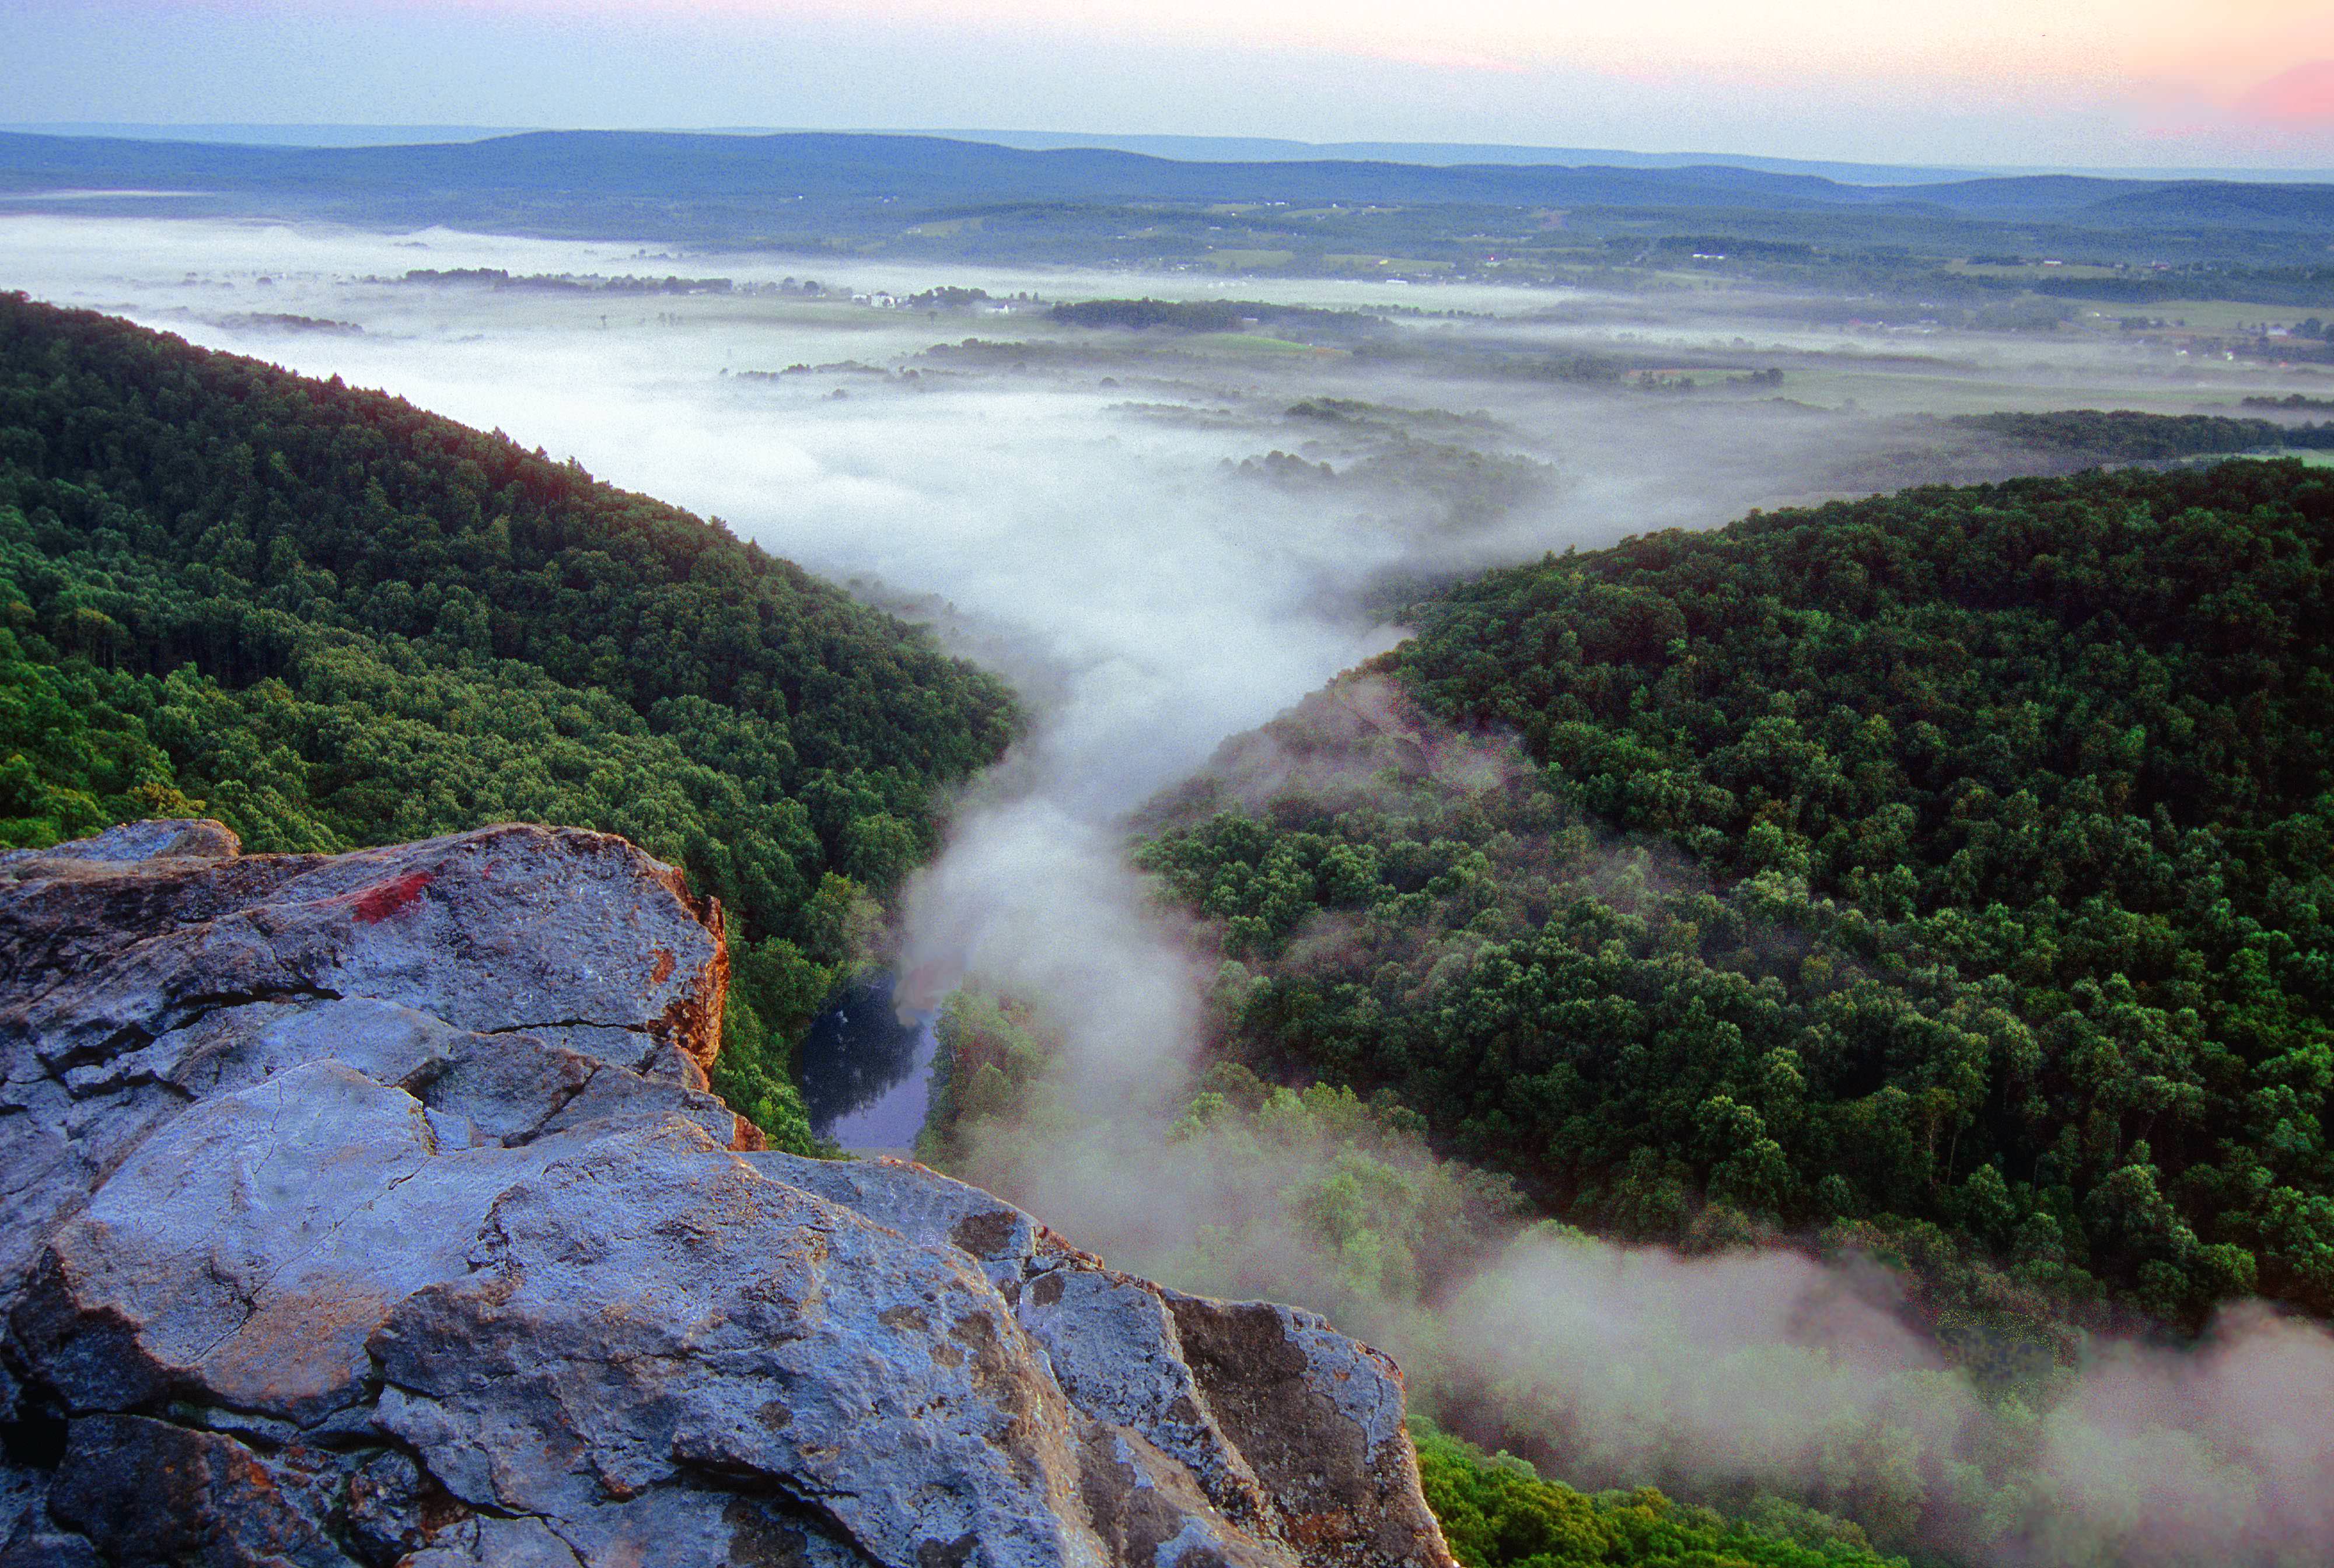 View from a rock outcropping of thick white mist rising up from the green forest in the valleyl below.